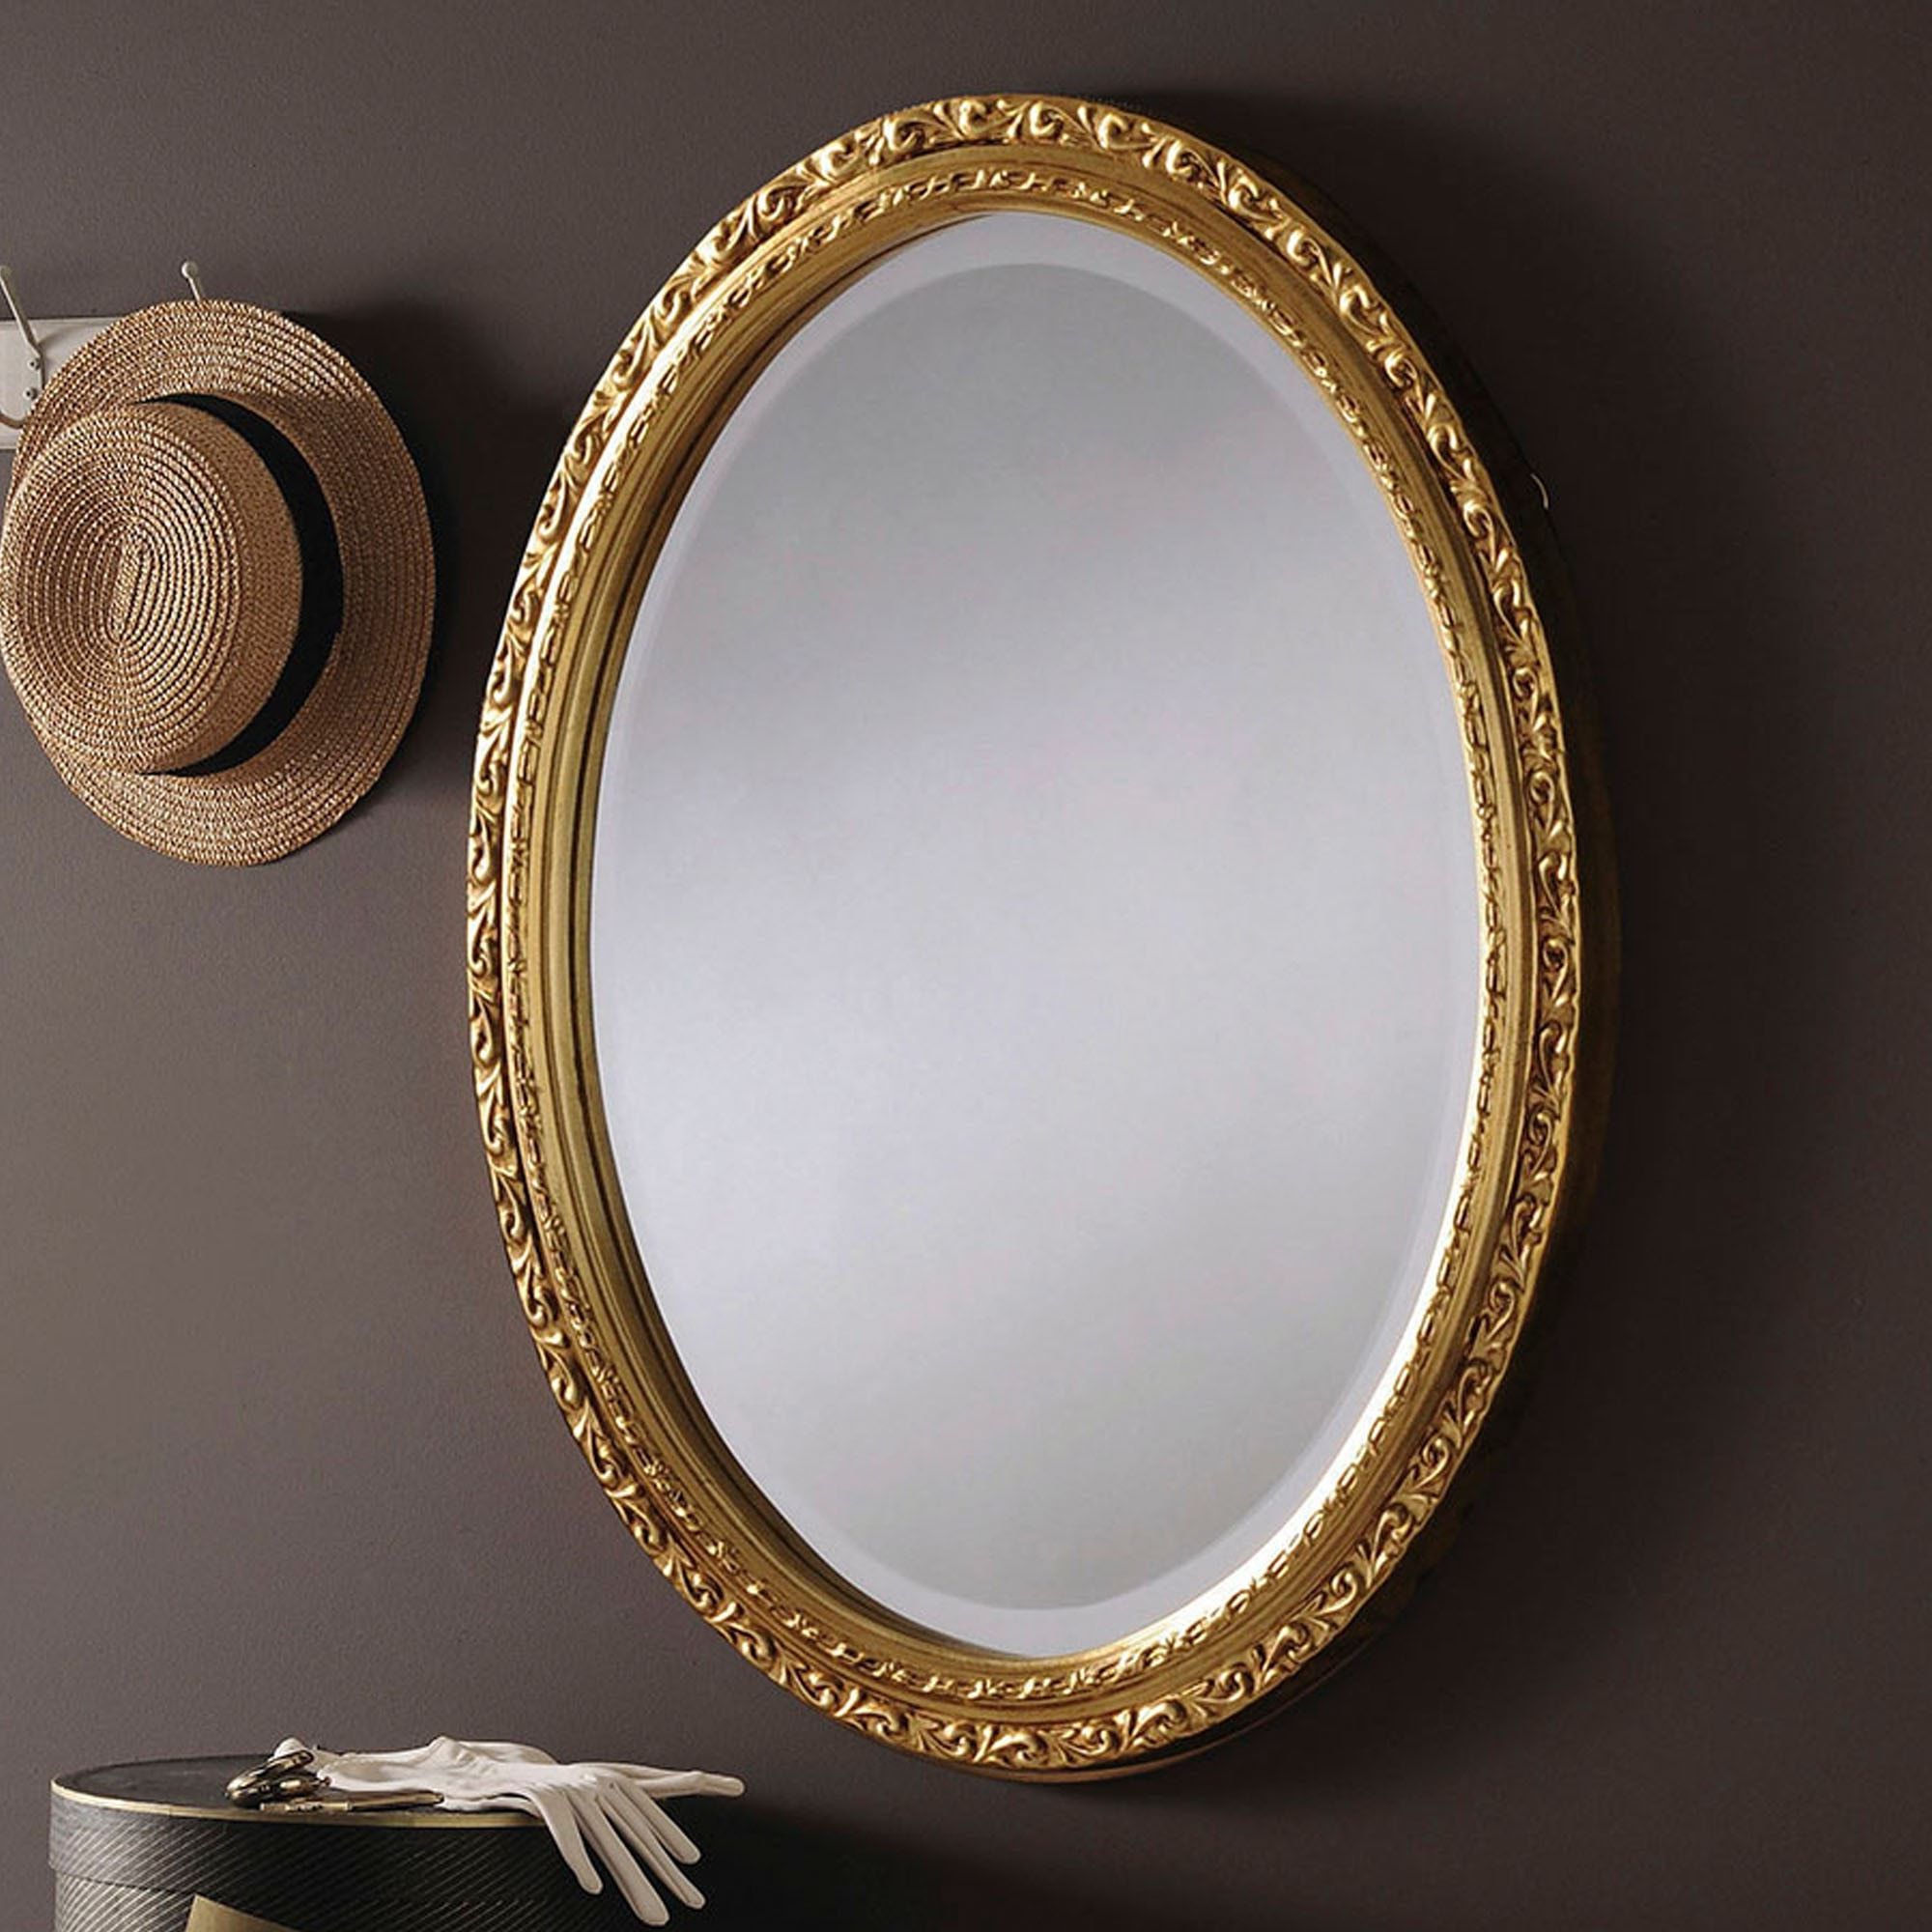 Nickel Framed Oval Wall Mirrors In Newest Decorative Gold Ornate Oval Wall Mirror (View 1 of 15)